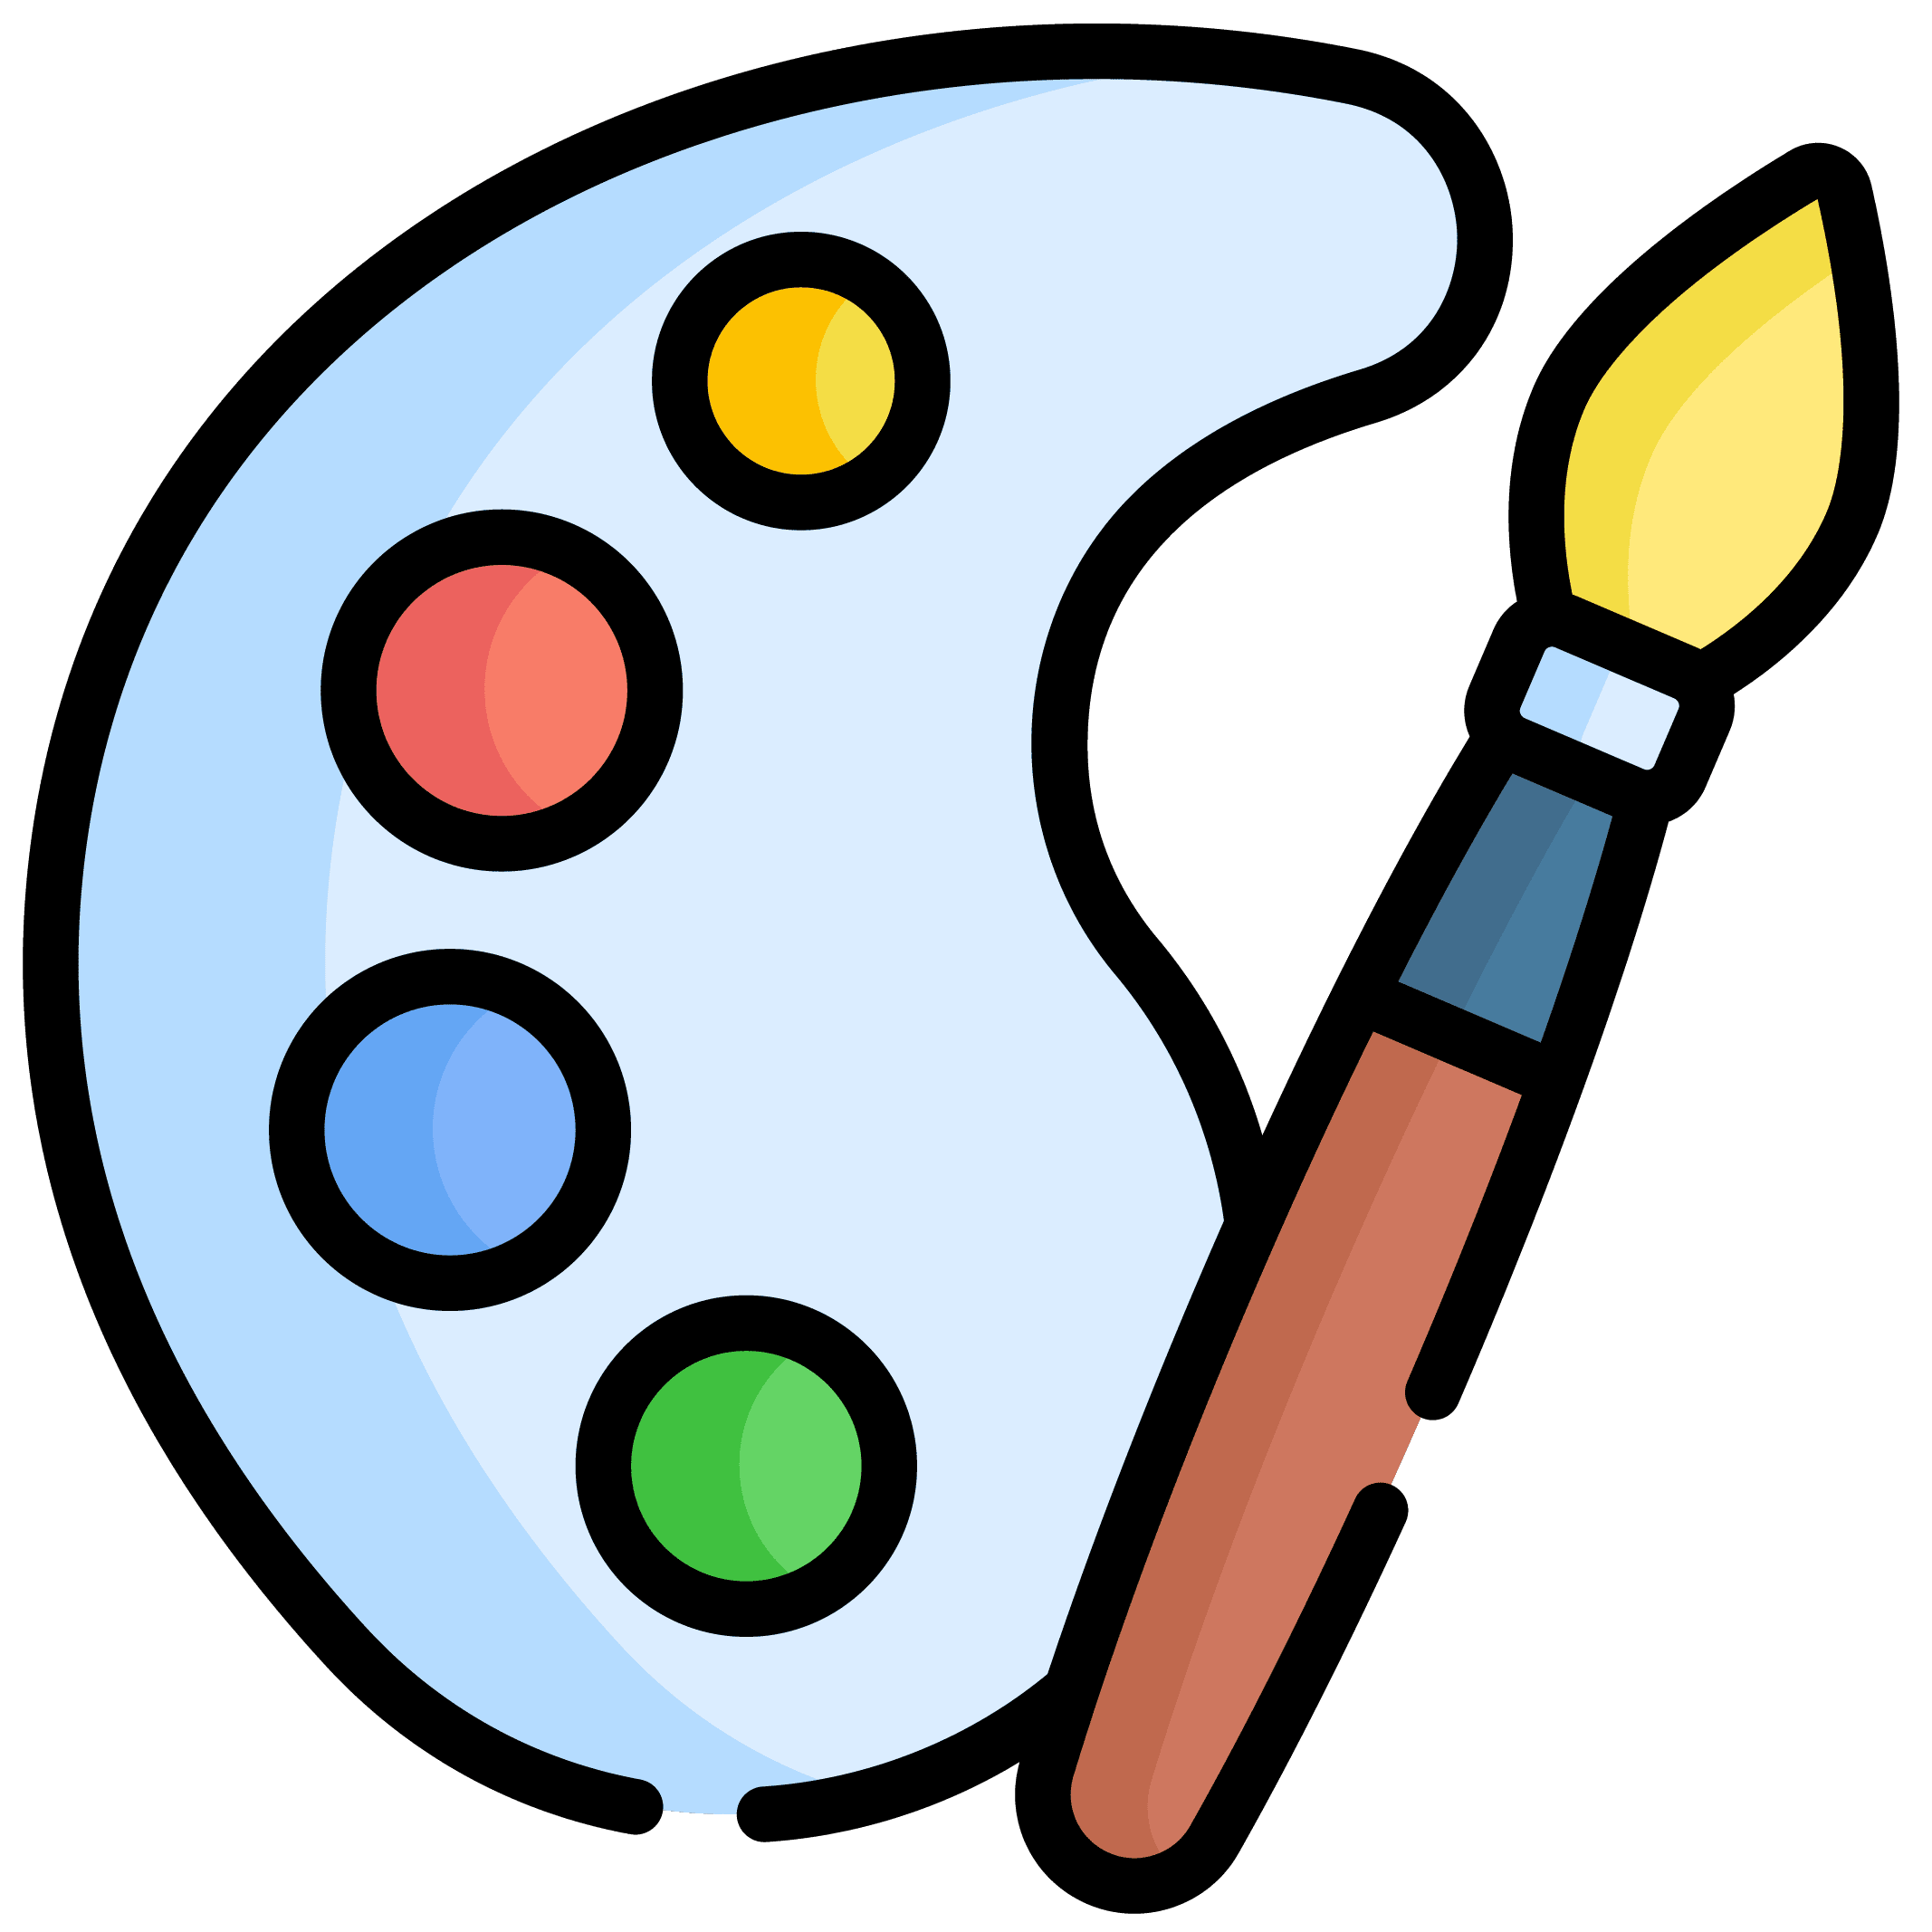 image of painter's brush and palette